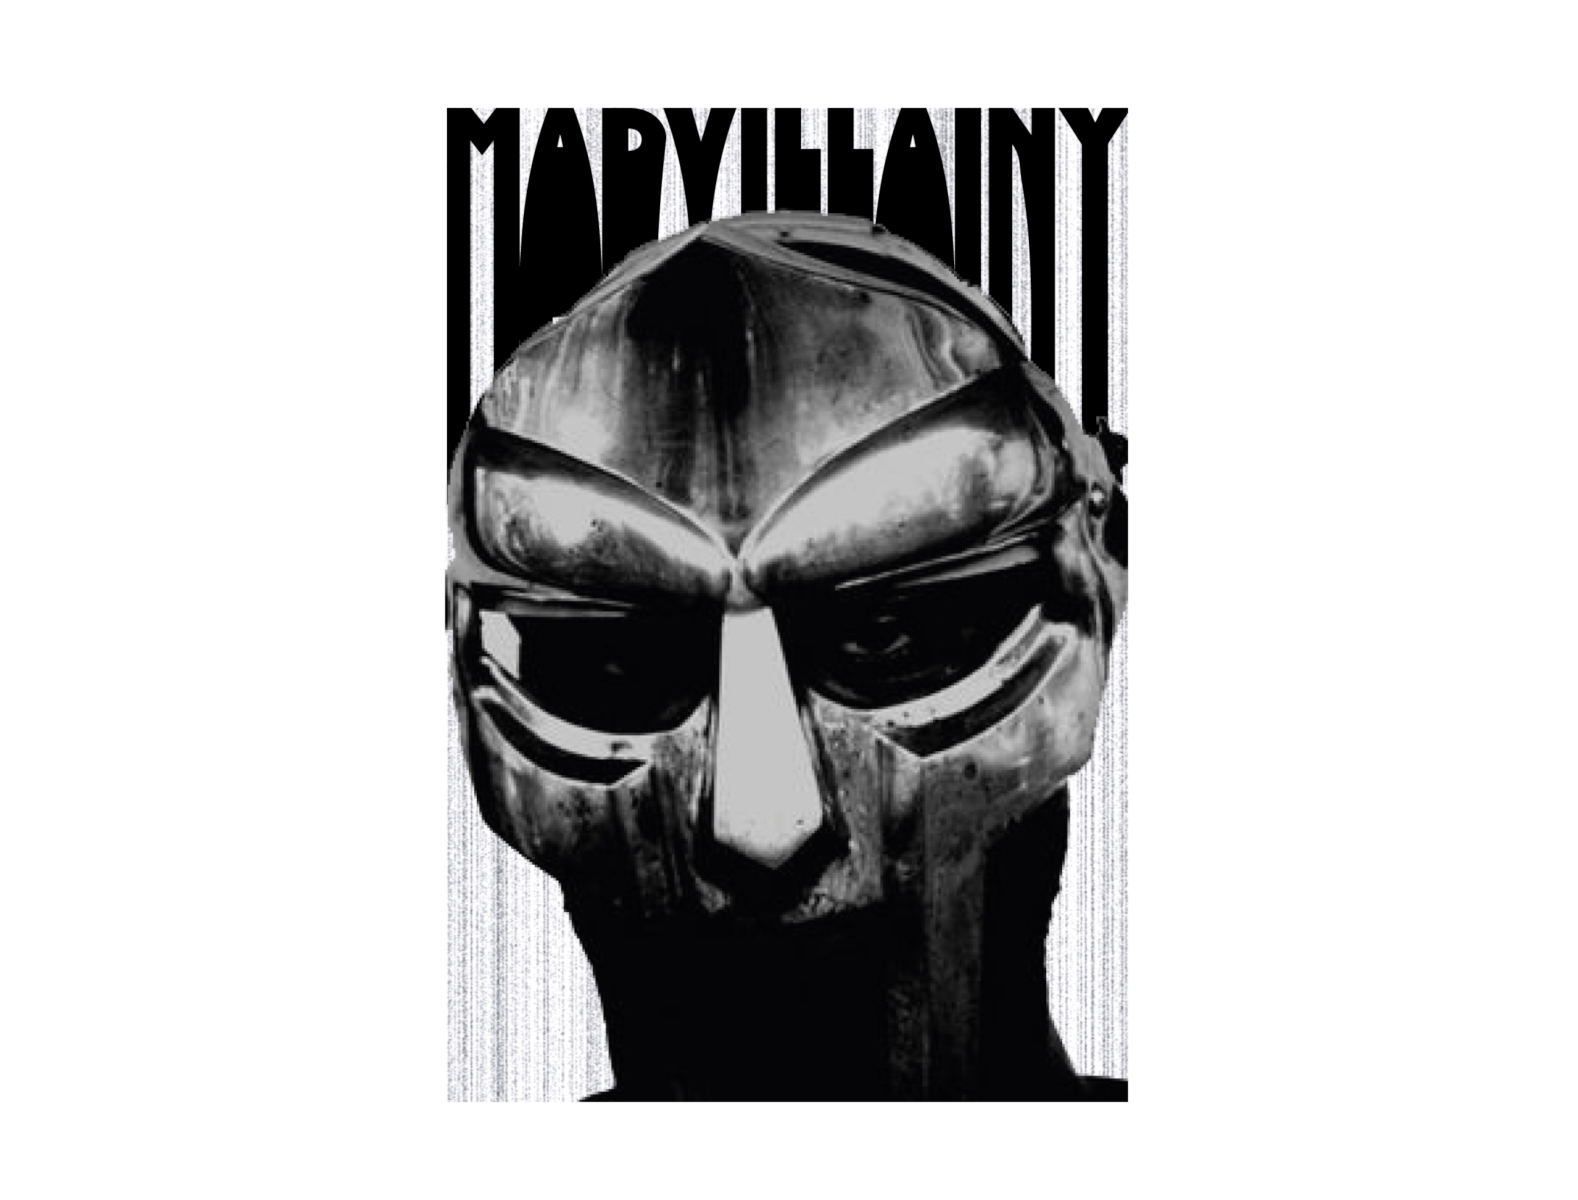 Madvillainy unlocked the promise of the rap album as a living document